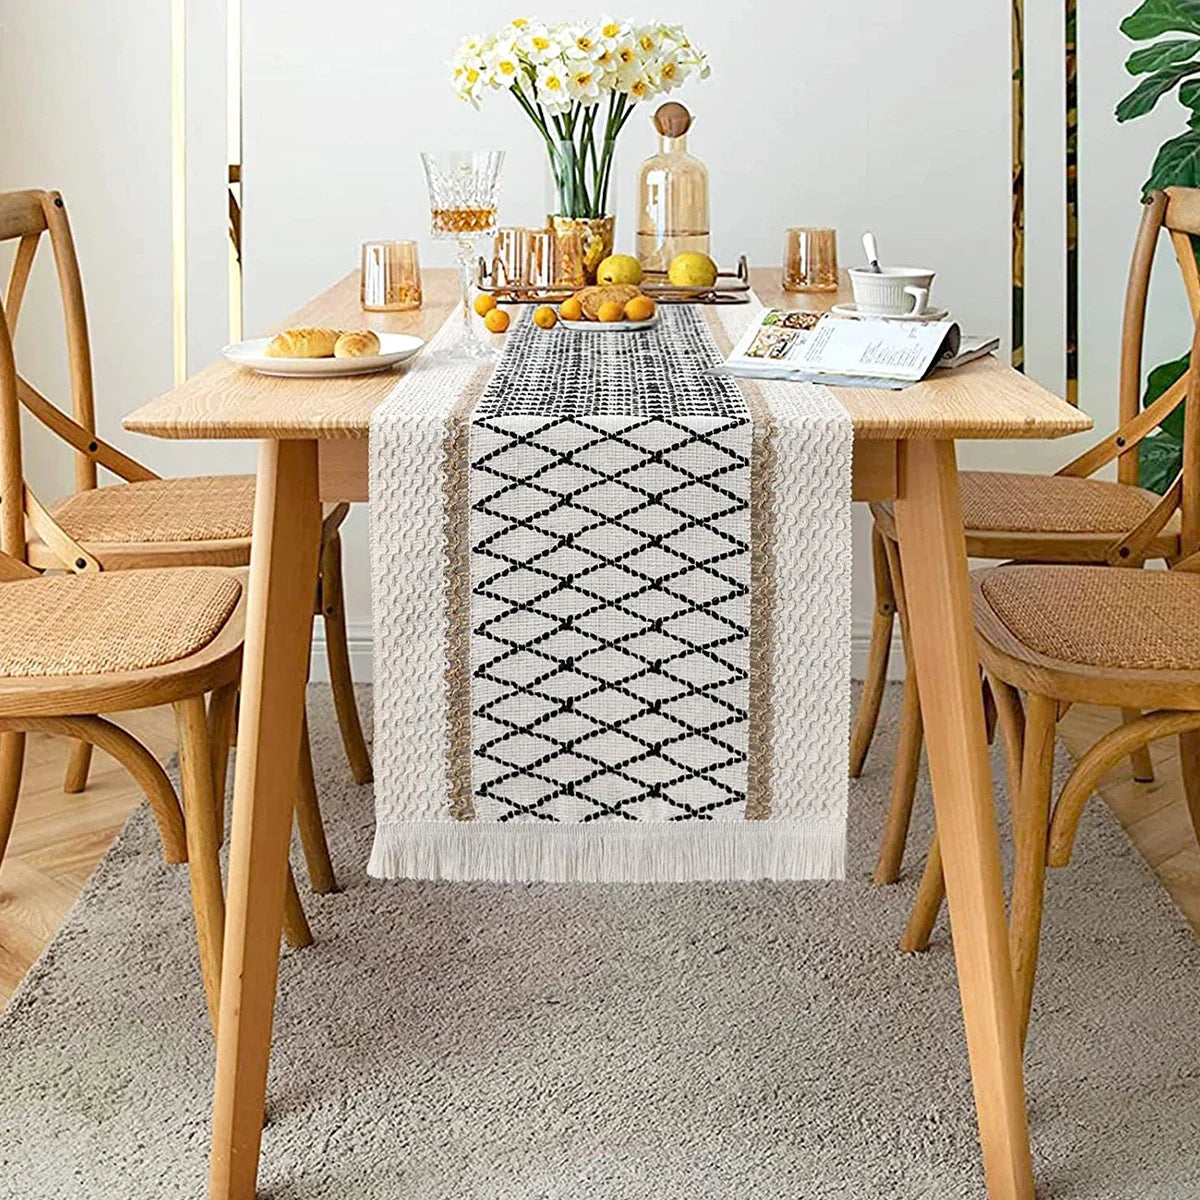 72/108 Inch Table Runner with Tassels Cotton Linen Bohemian Rustic Farmhouse Table Cloth